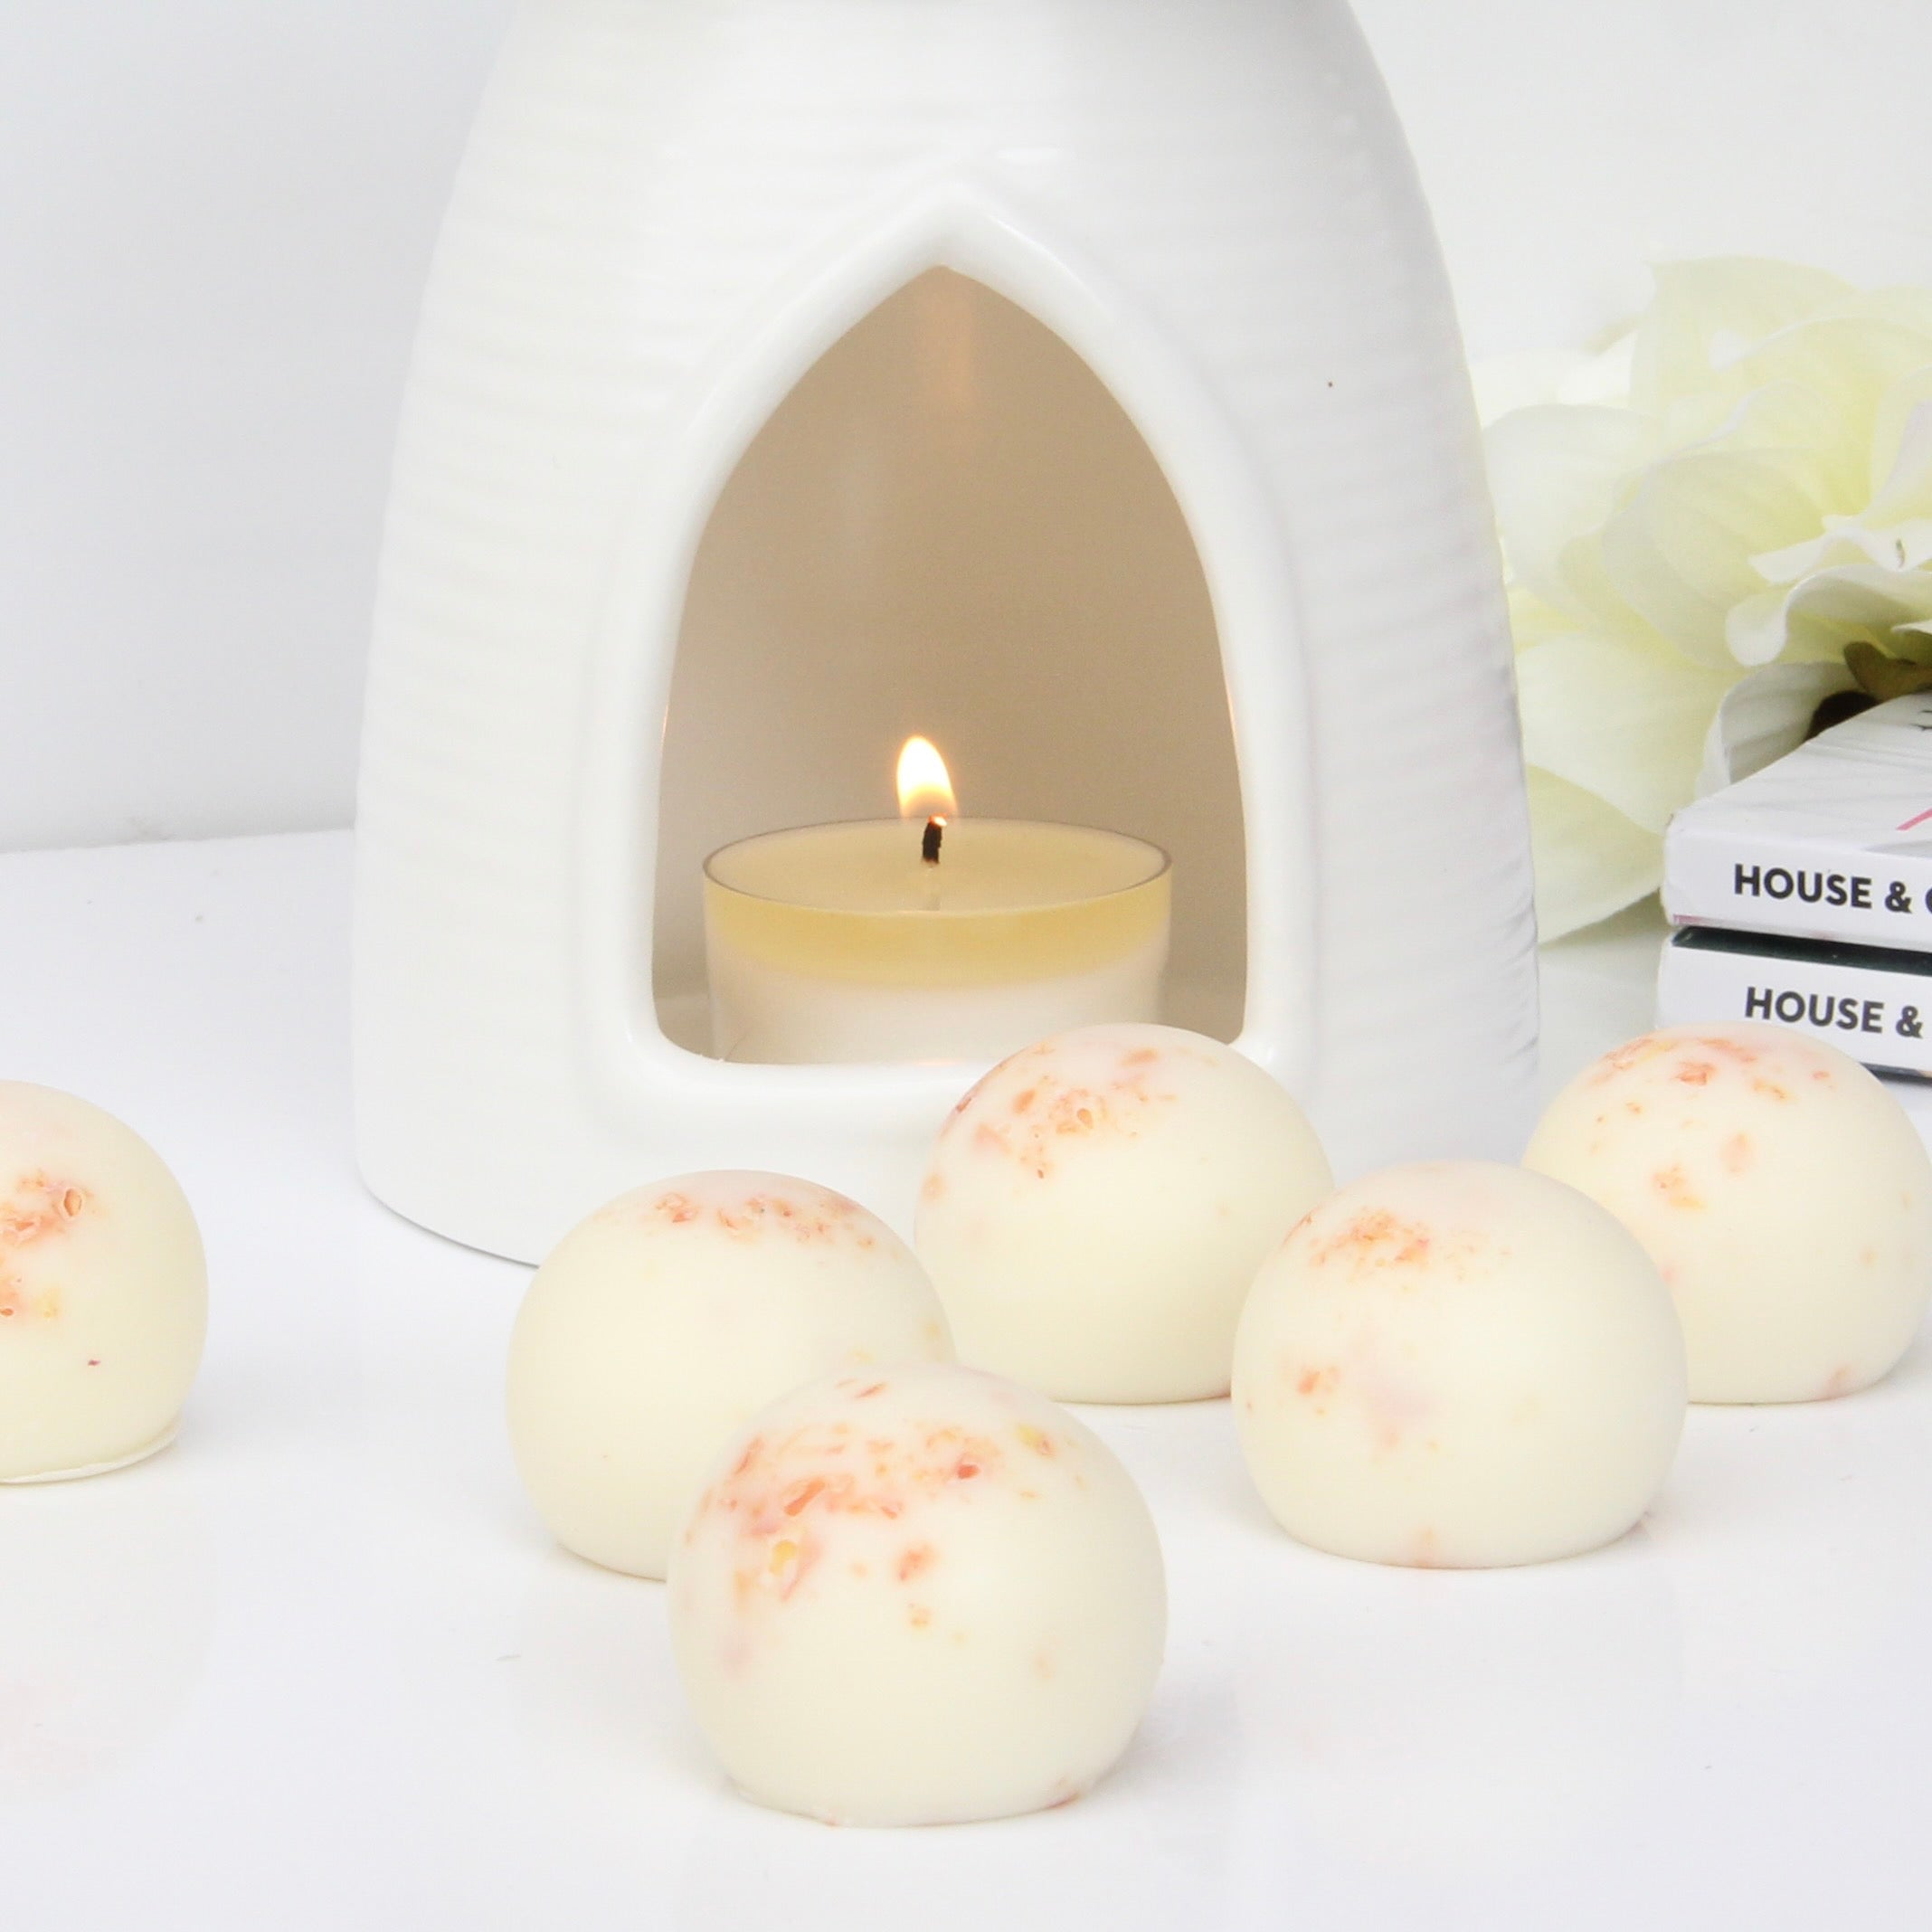 Egyptian Linen & Mimosa Scented Wax Melts